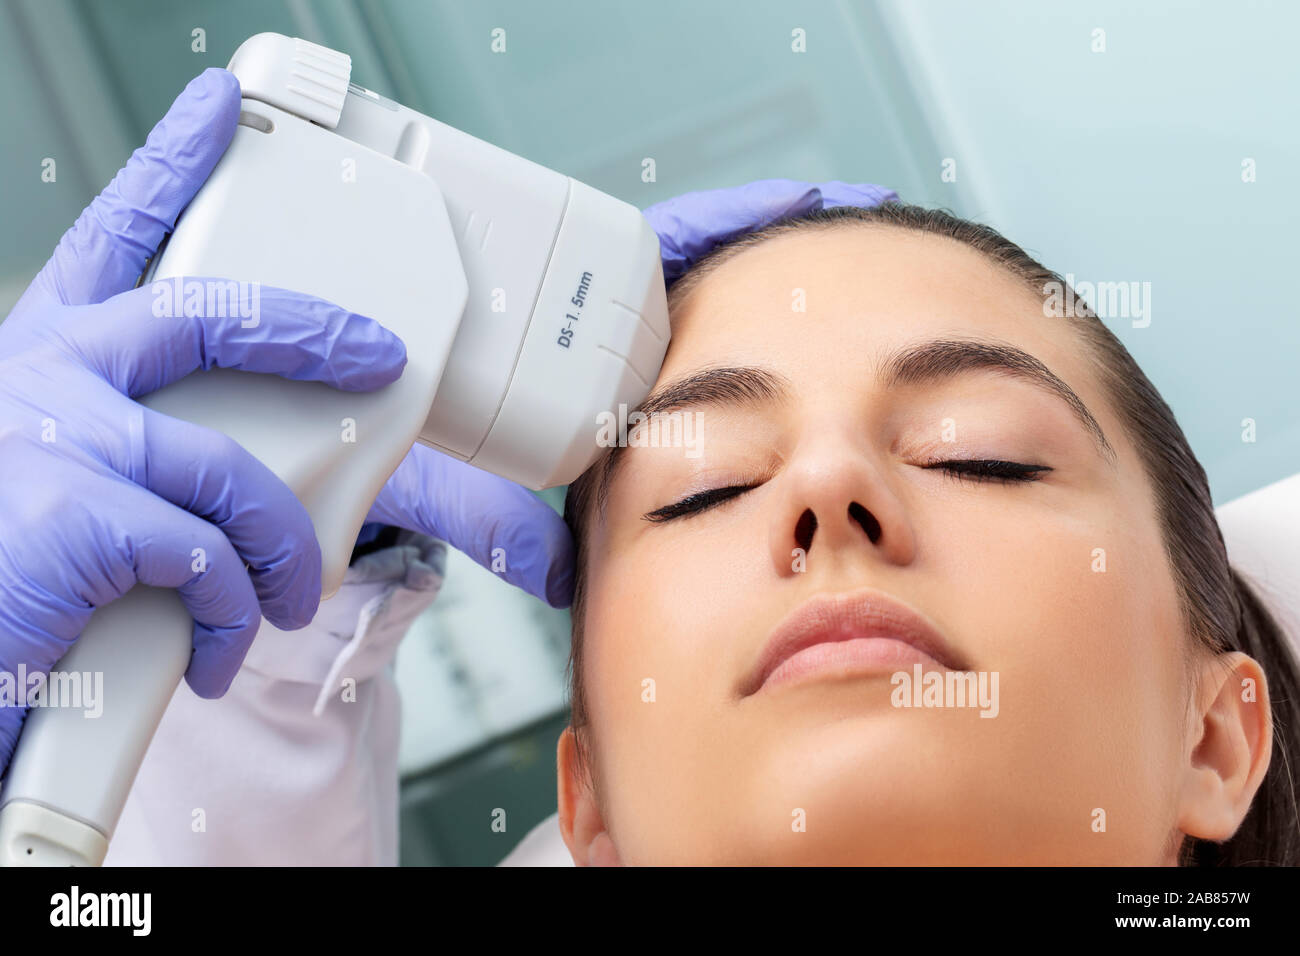 Close up of therapist doing removing sun damage on woman's forehead with high intensity ultrasound device. Stock Photo